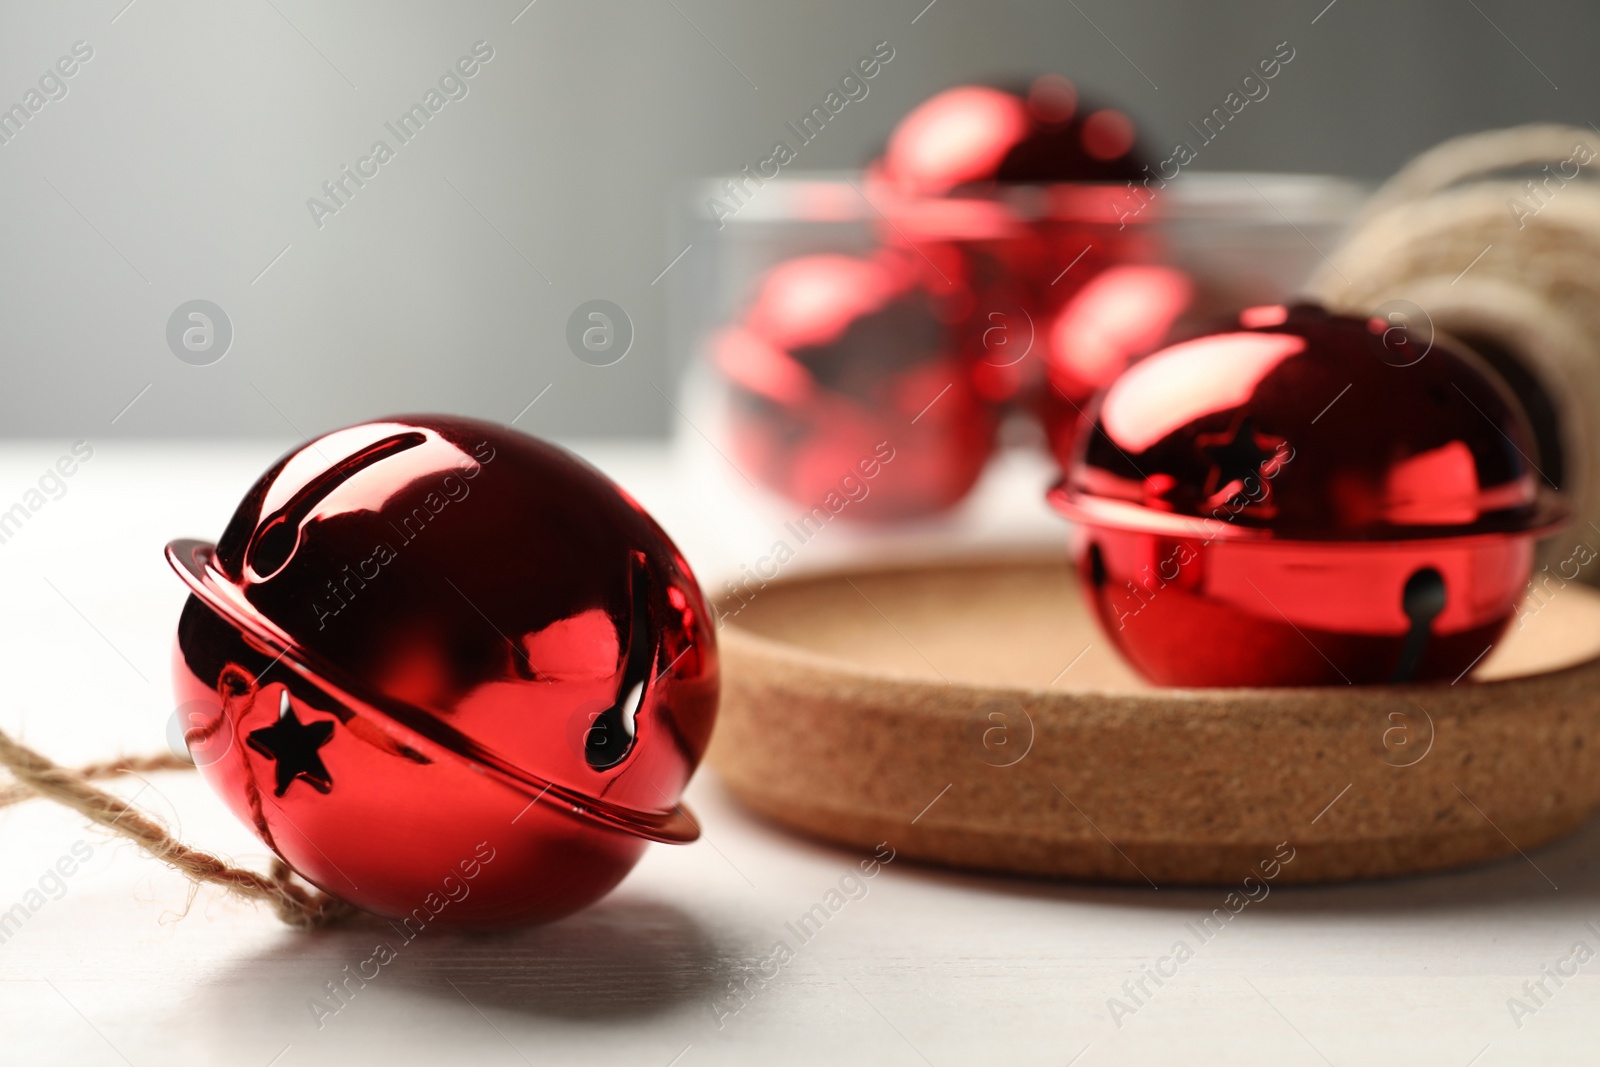 Photo of Red sleigh bell with rope on white table, closeup